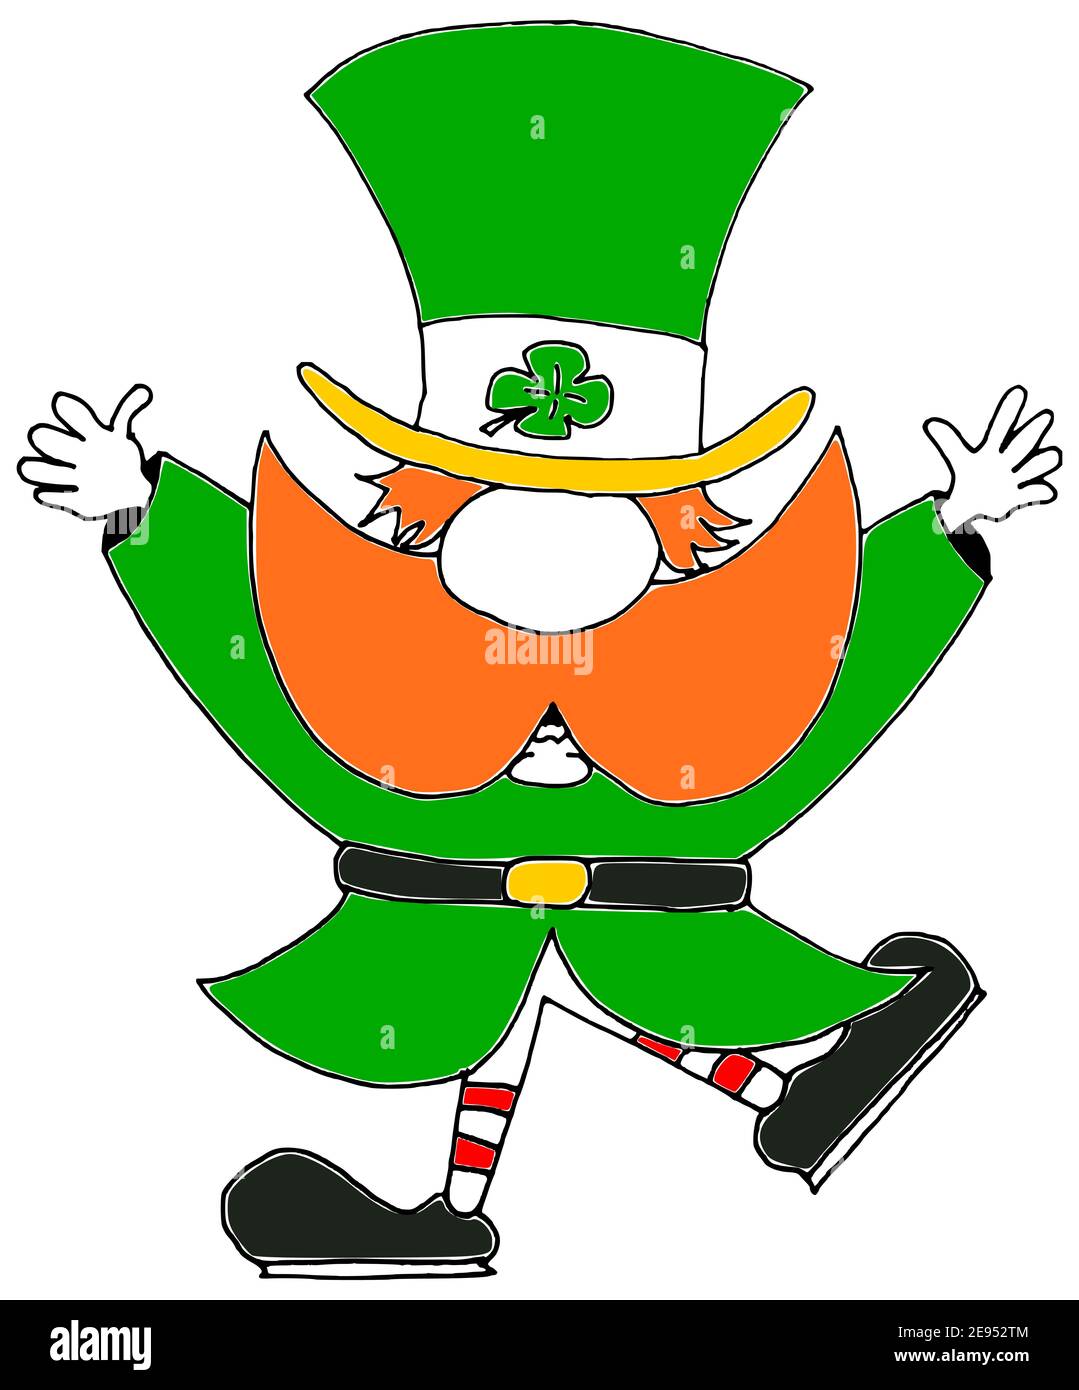 Happy hand drawn leprechaun as a symbol for St. Patricks day colorised Stock Photo